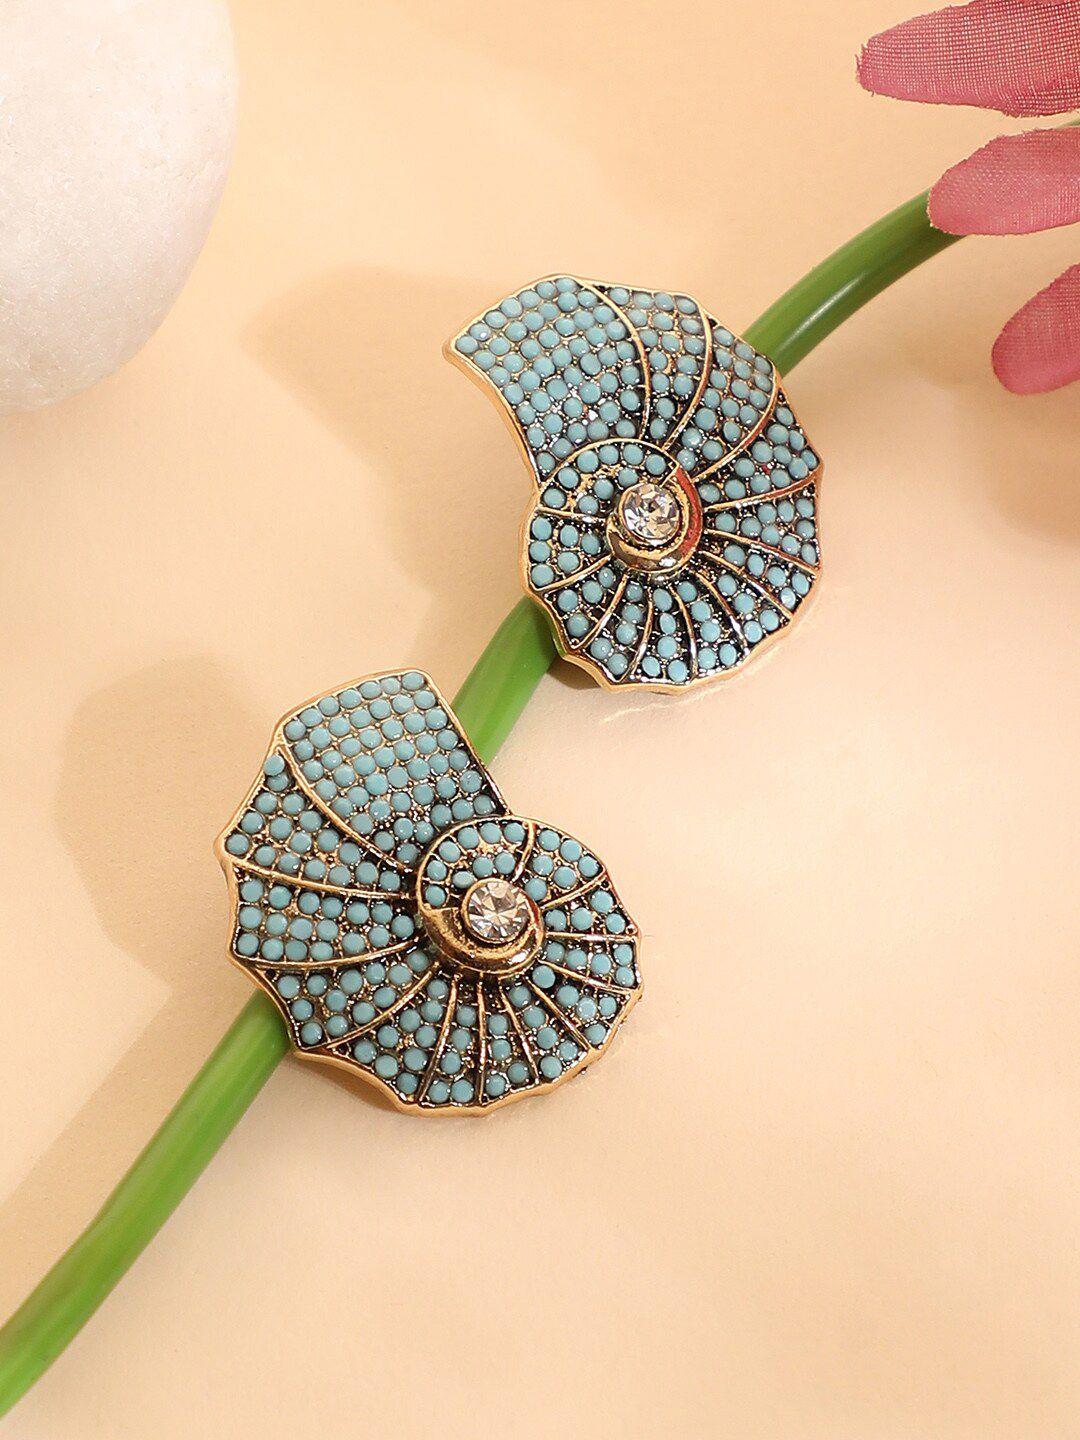 sohi gold-plated contemporary studs earrings